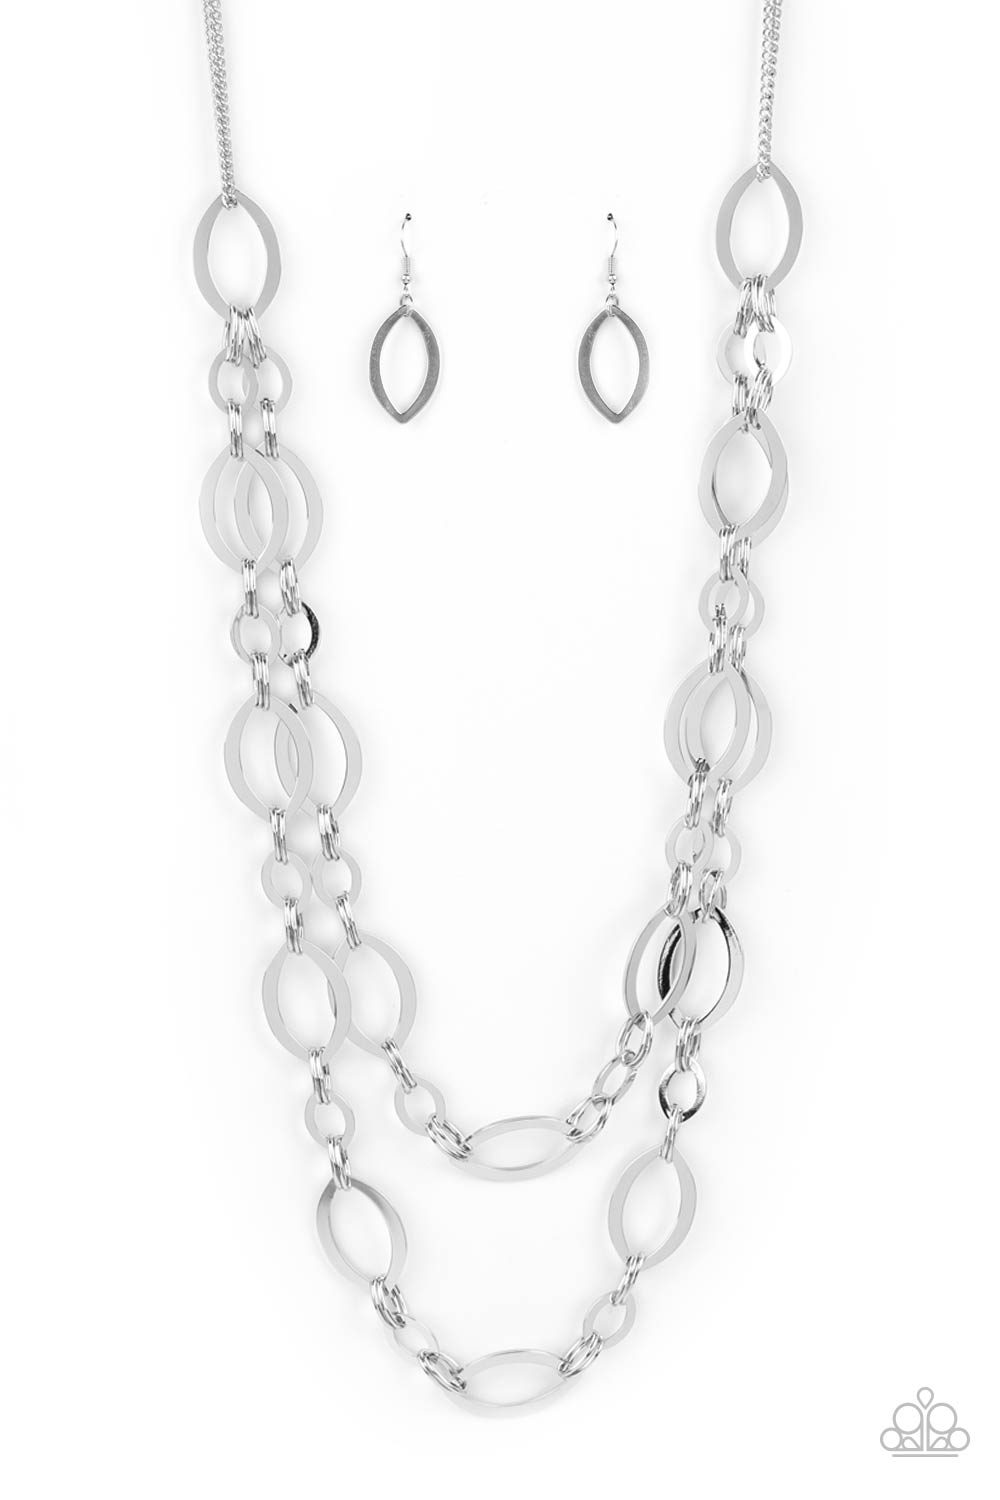 The OVAL-achiever - Silver necklace